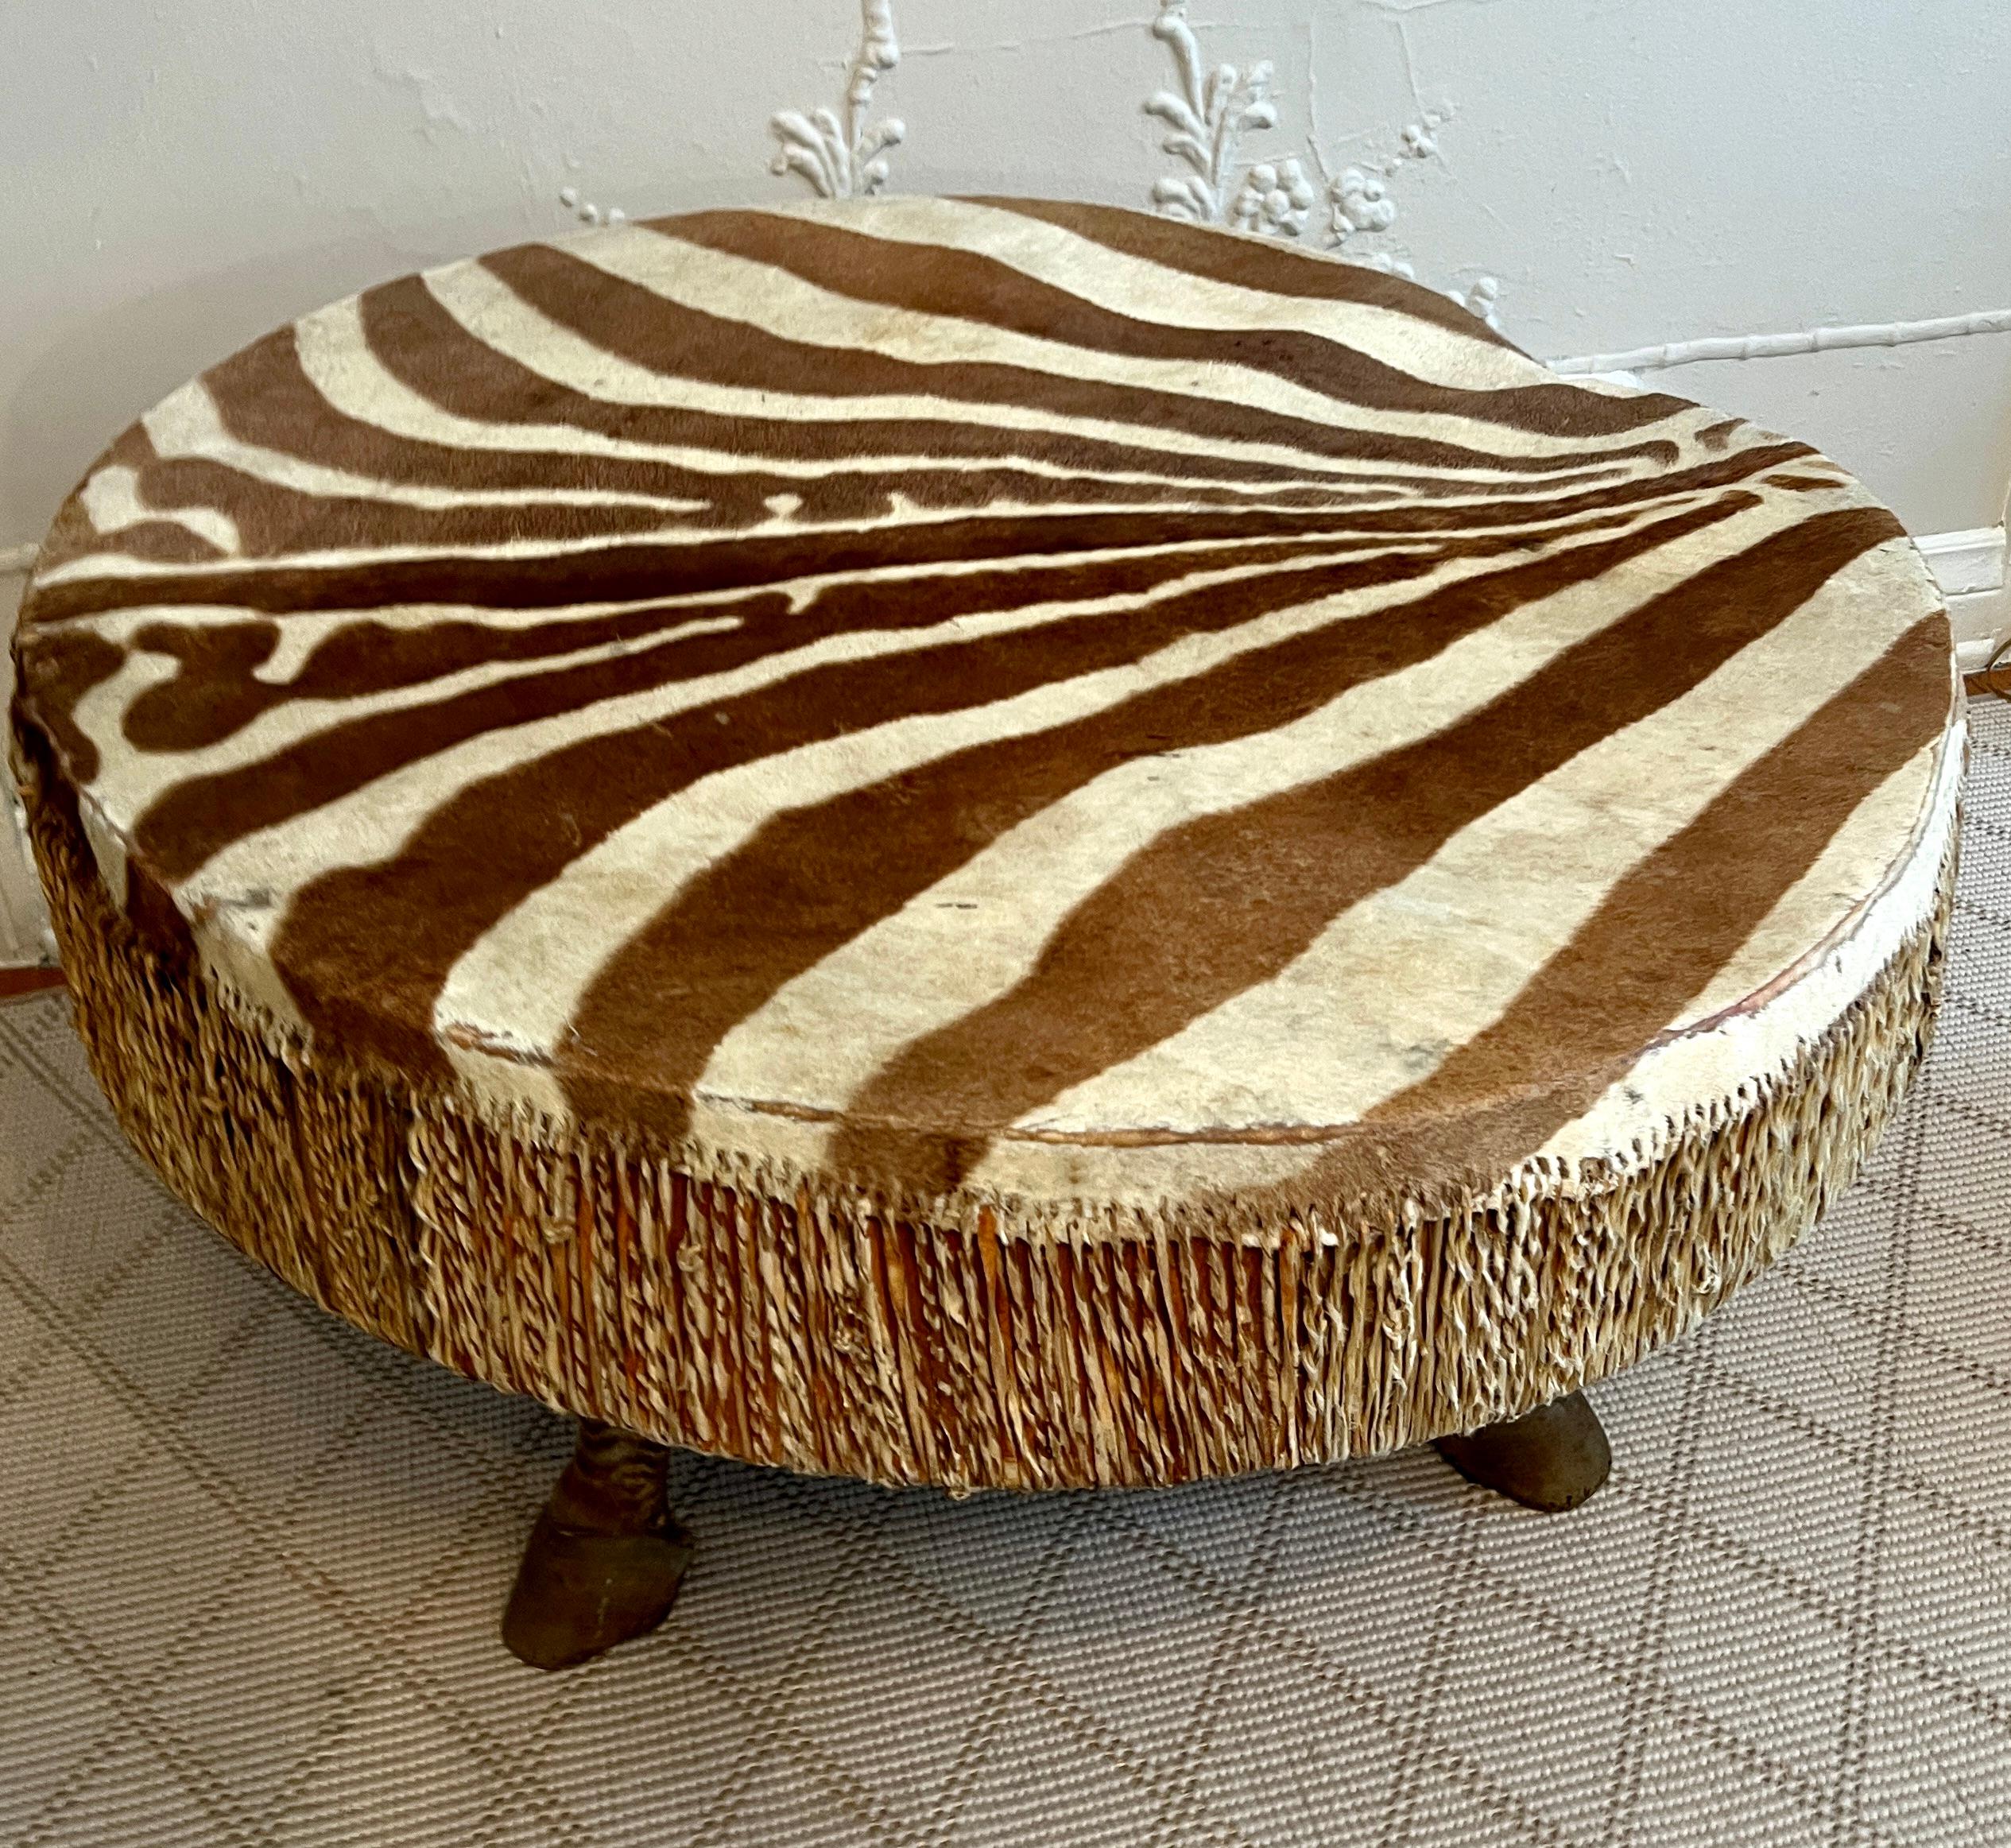 20th Century African Zebra Drum Table with Three Zebra Legs from Ghana For Sale